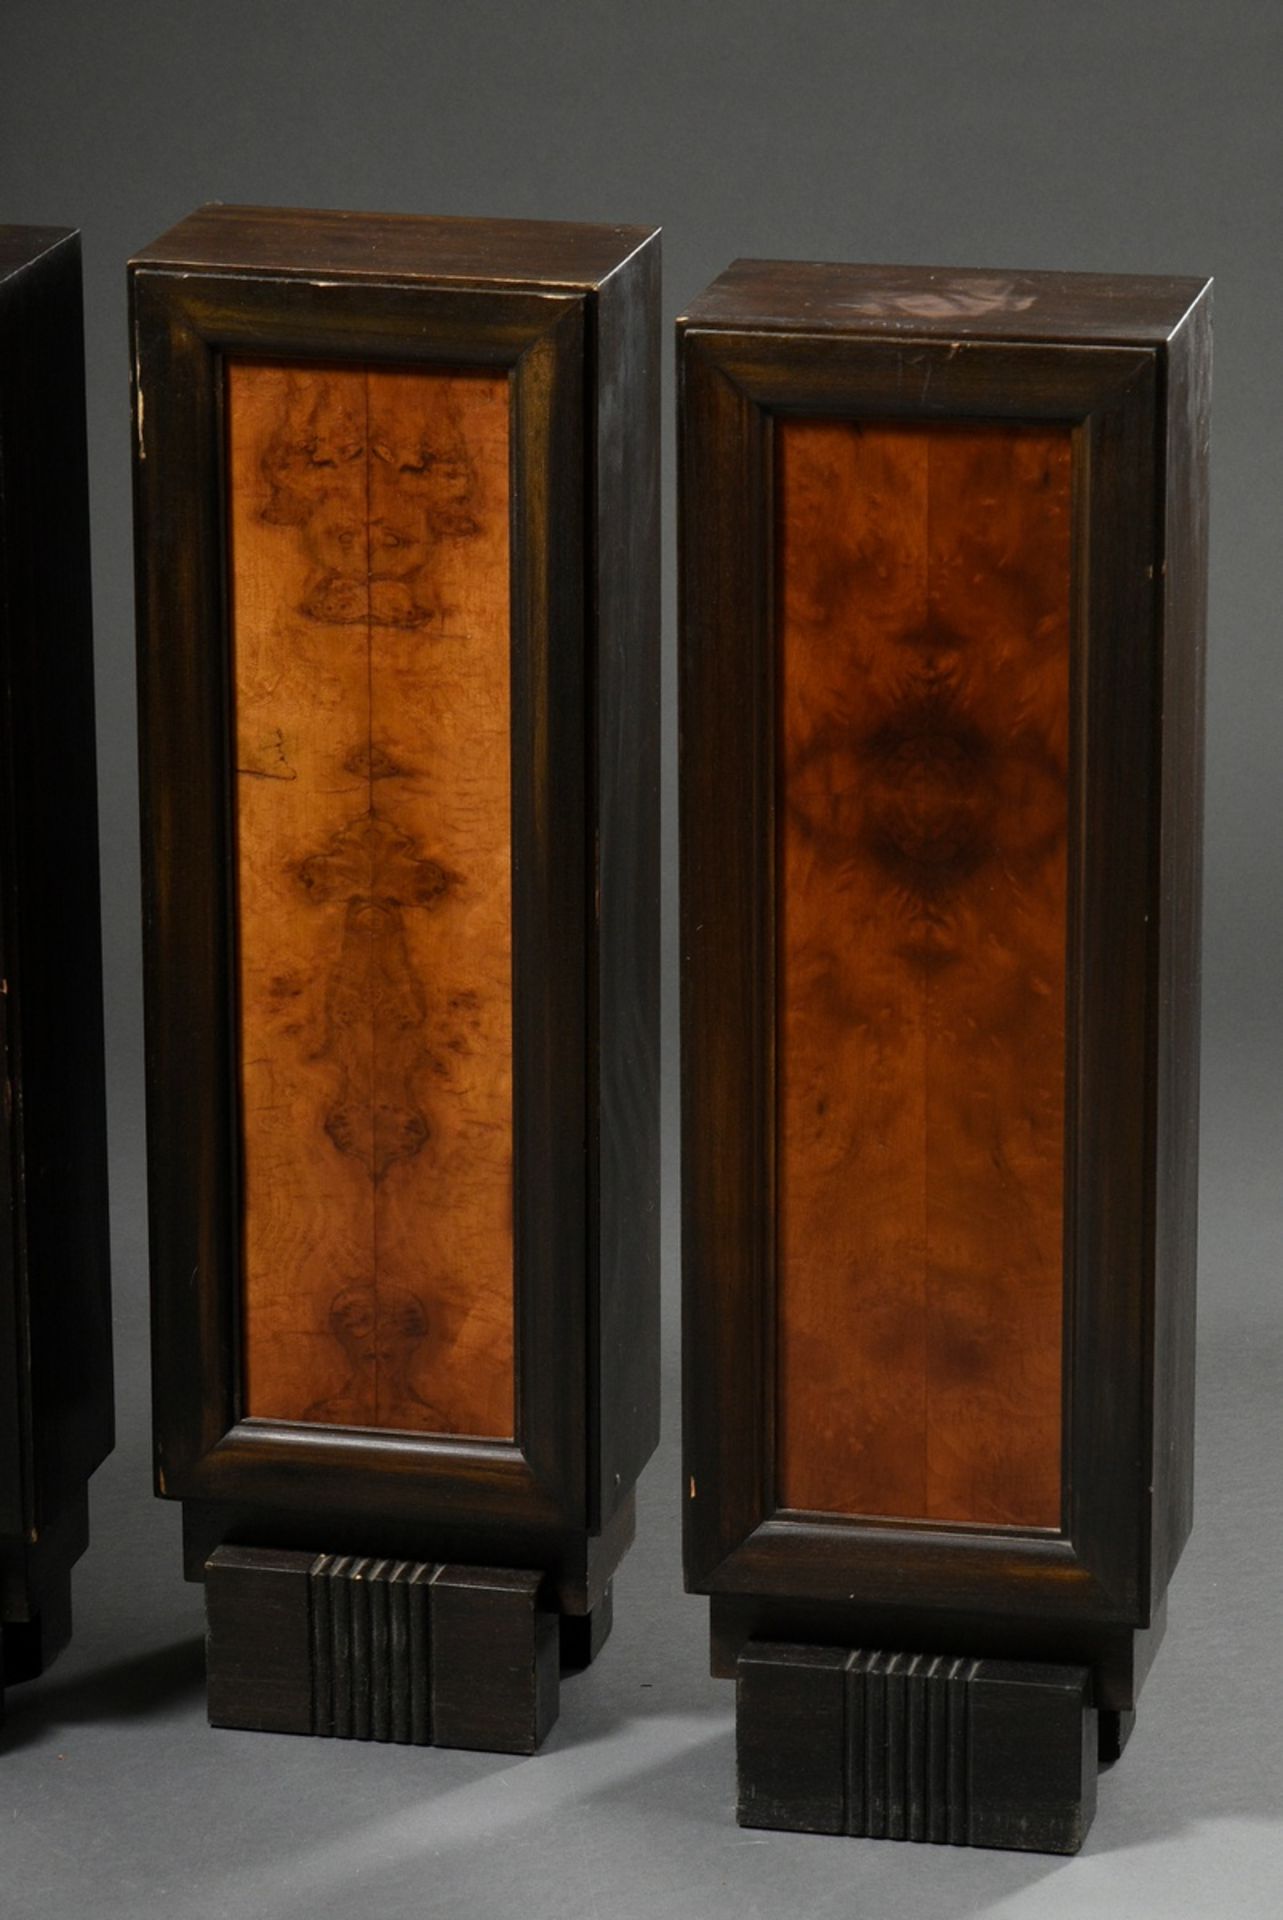 4 Small Art Deco sculptures postaments, dark stained wood with walnut inlays, 75x23x15cm, Provenanc - Image 2 of 4